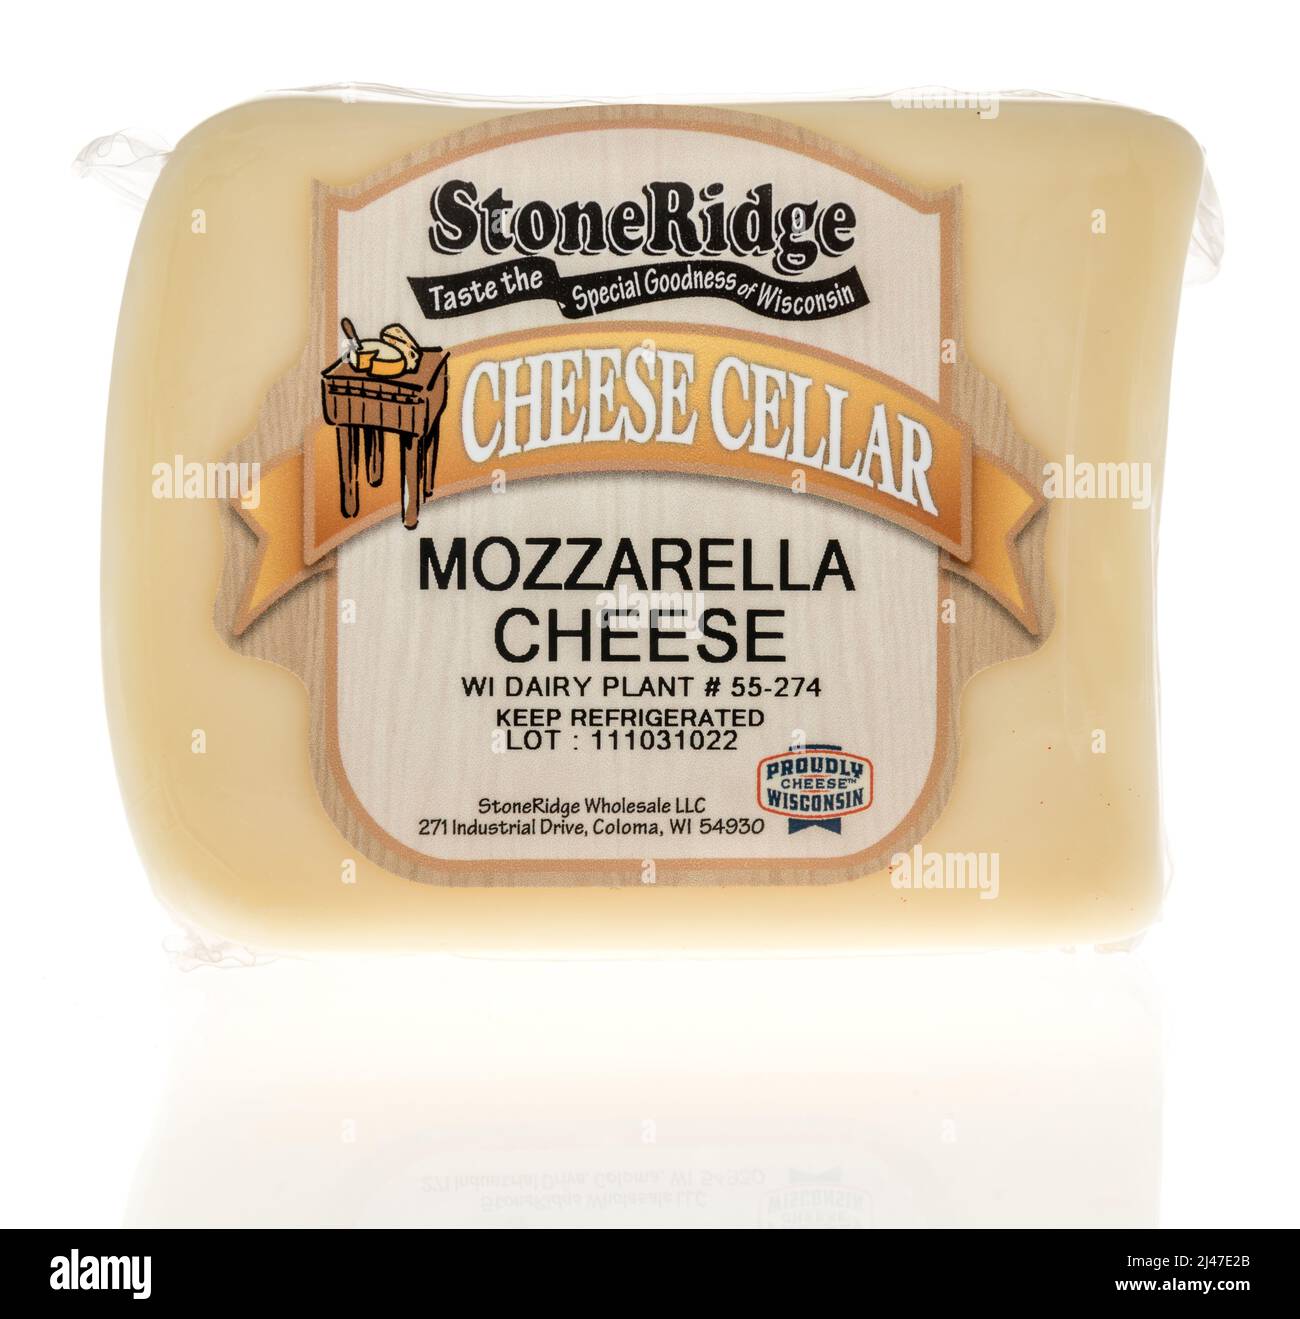 Winneconne, WI -2 April 2022: A package of Stoneridge cheese cellar mozzarella cheese on an isolated background Stock Photo